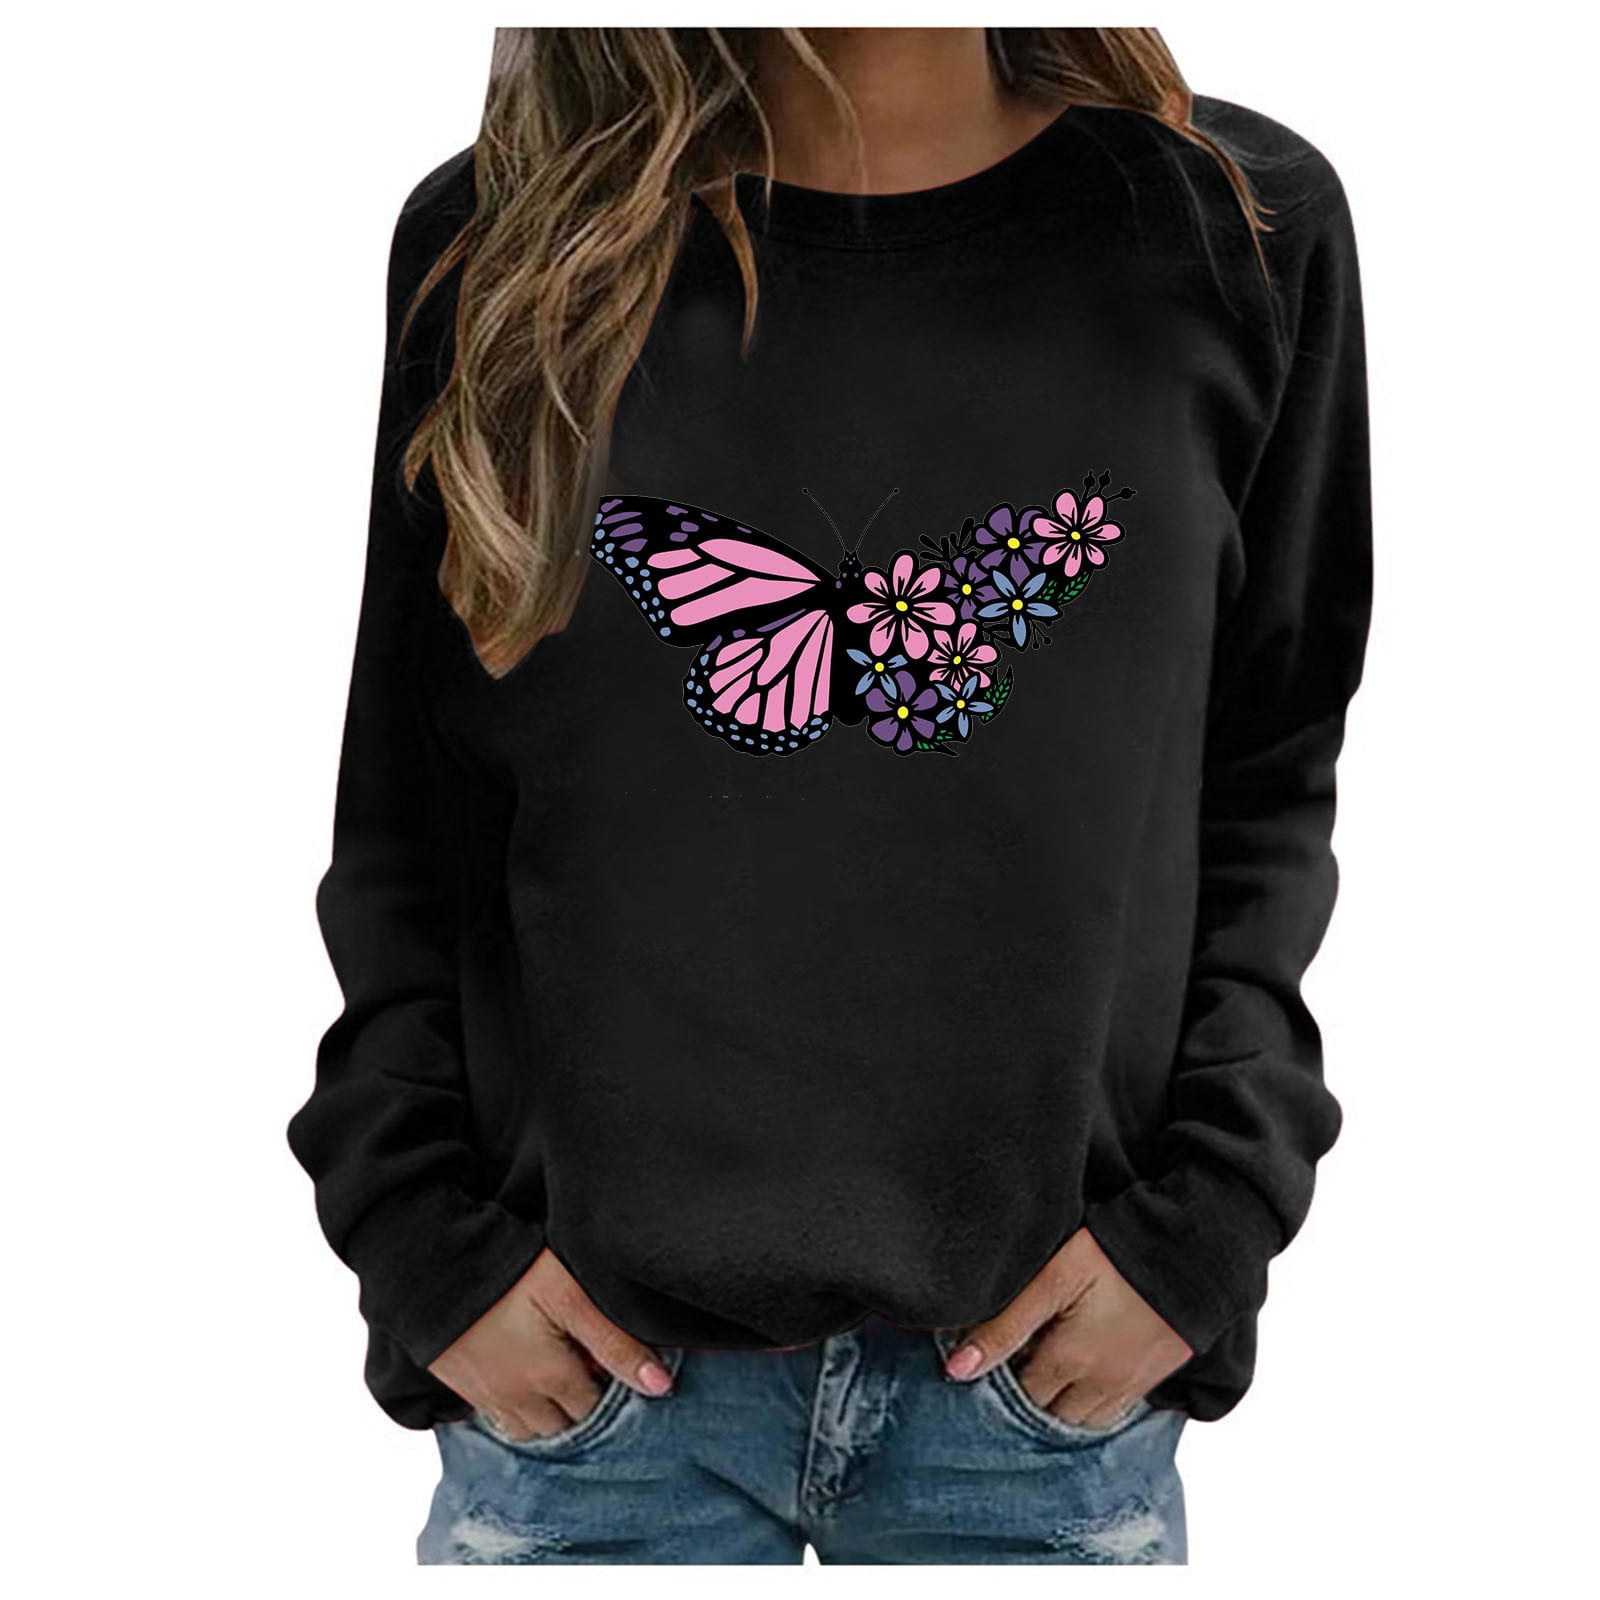 Cute Fall Tops for Women Butterfly Print Long Sleeve Sweatshirts Loose Casual Crewneck Comfortable Pullover Shirts 